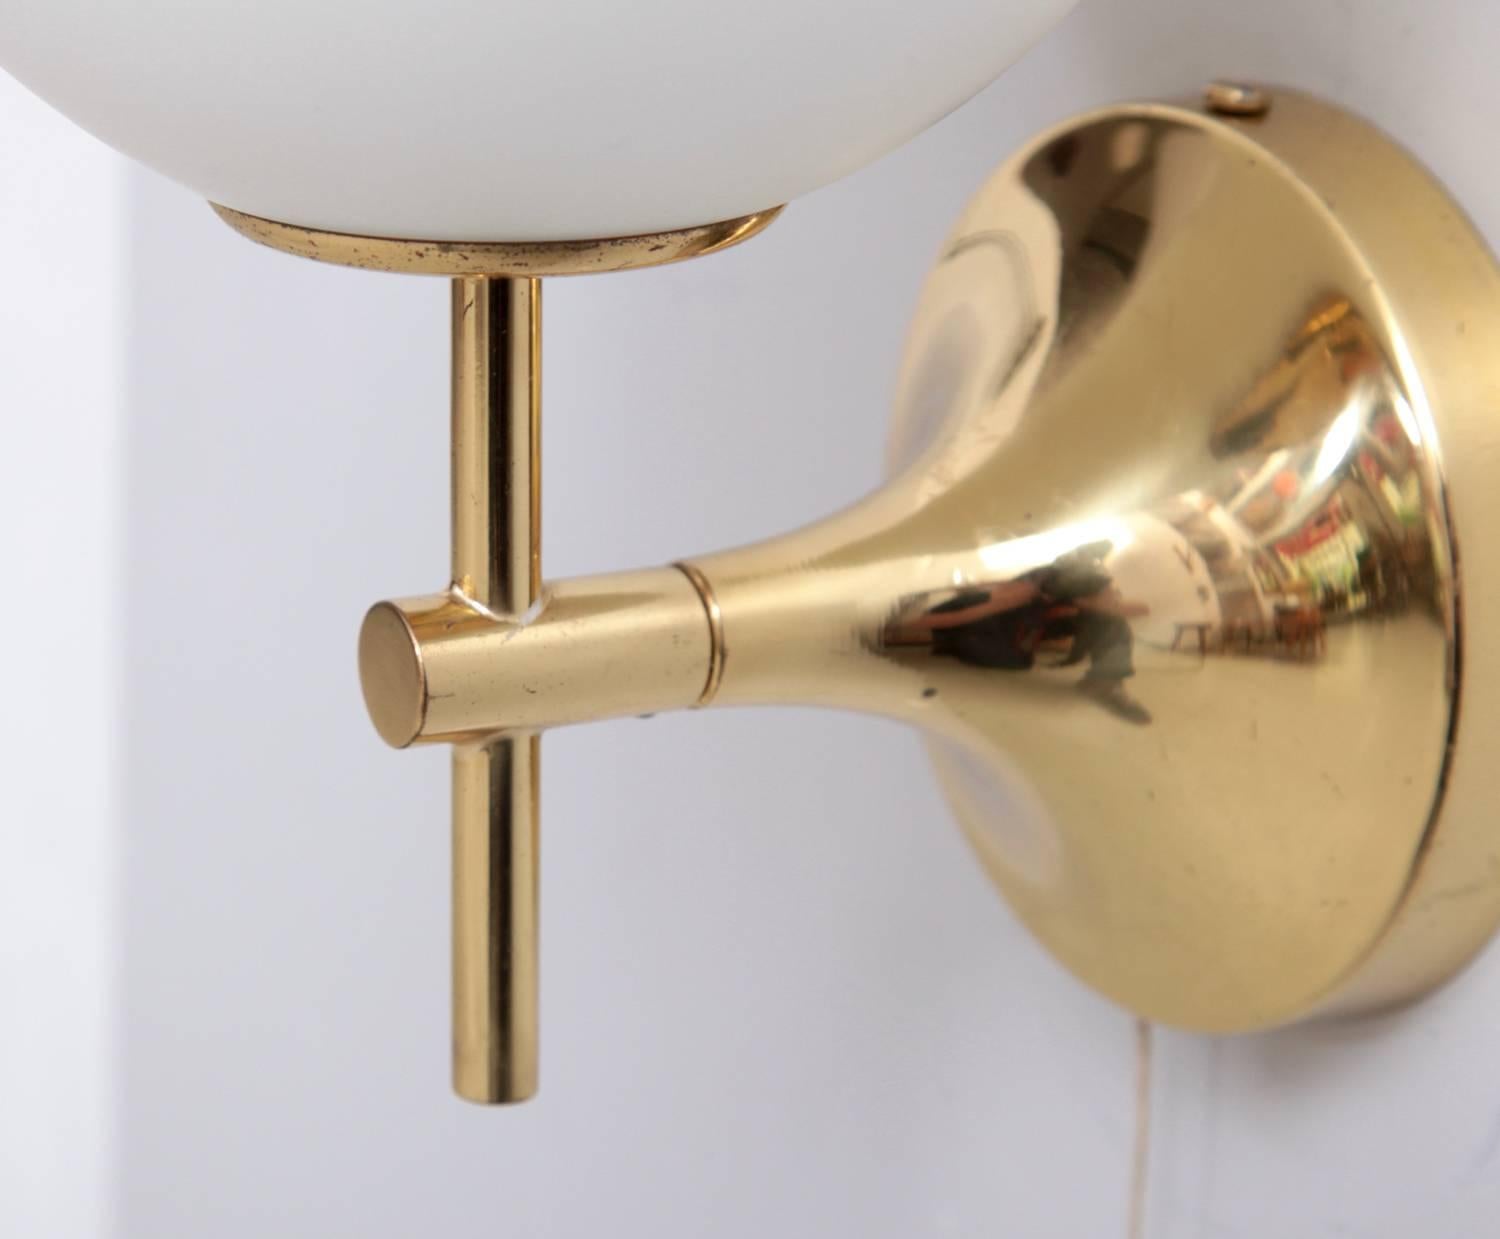 Pair of sconces composed of polished brass golden fixtures with white frosted glass globe shades in excellent condition. Signed! One x E14 each.
To be on the safe side, the lamp should be checked locally by a specialist concerning local